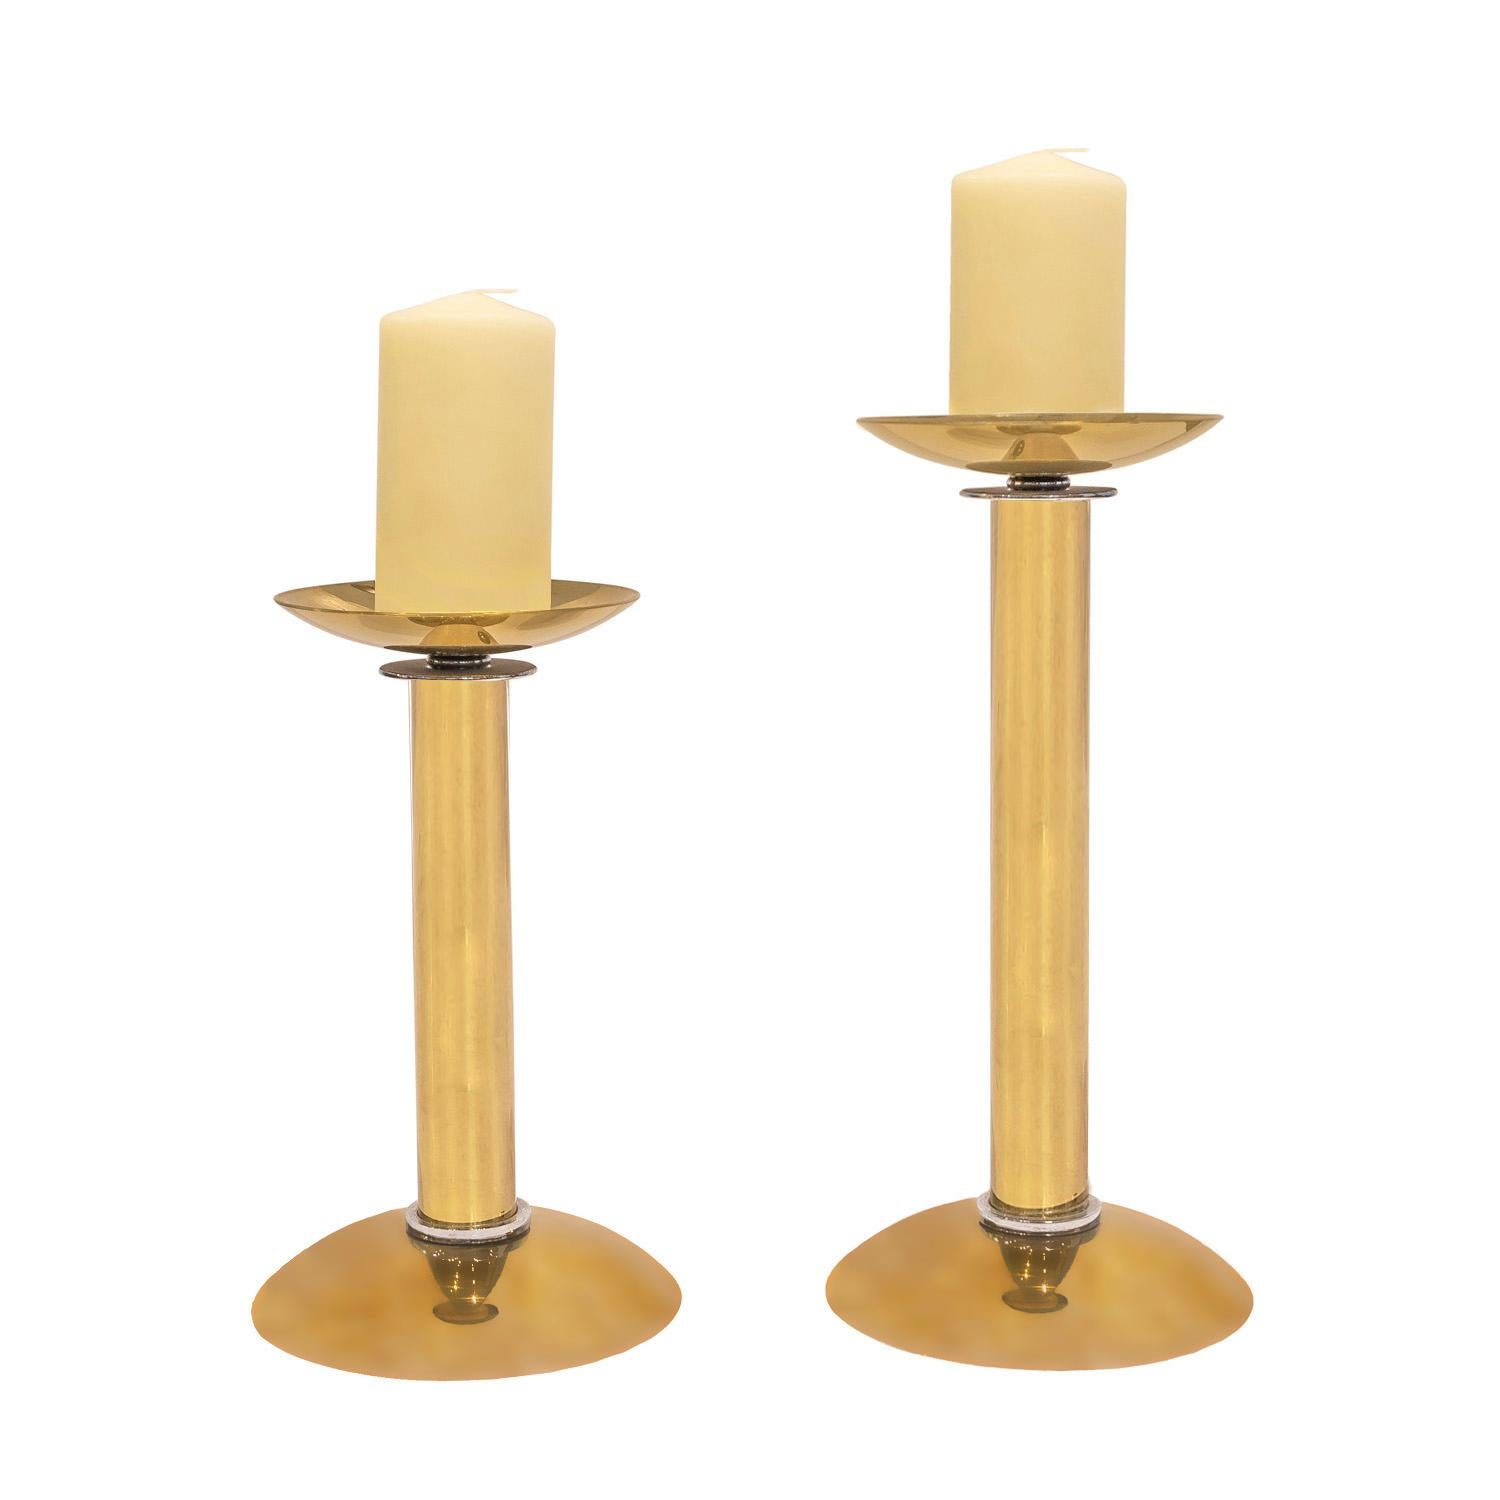 Pair of candle holders in brass with chrome accents by Karl Springer, American 1980's. These iconic Karl Springer candle holders are both chic and beautifully made.

Reference 
Karl Springer Red Binder Catalog, published in the 1980’s, Section